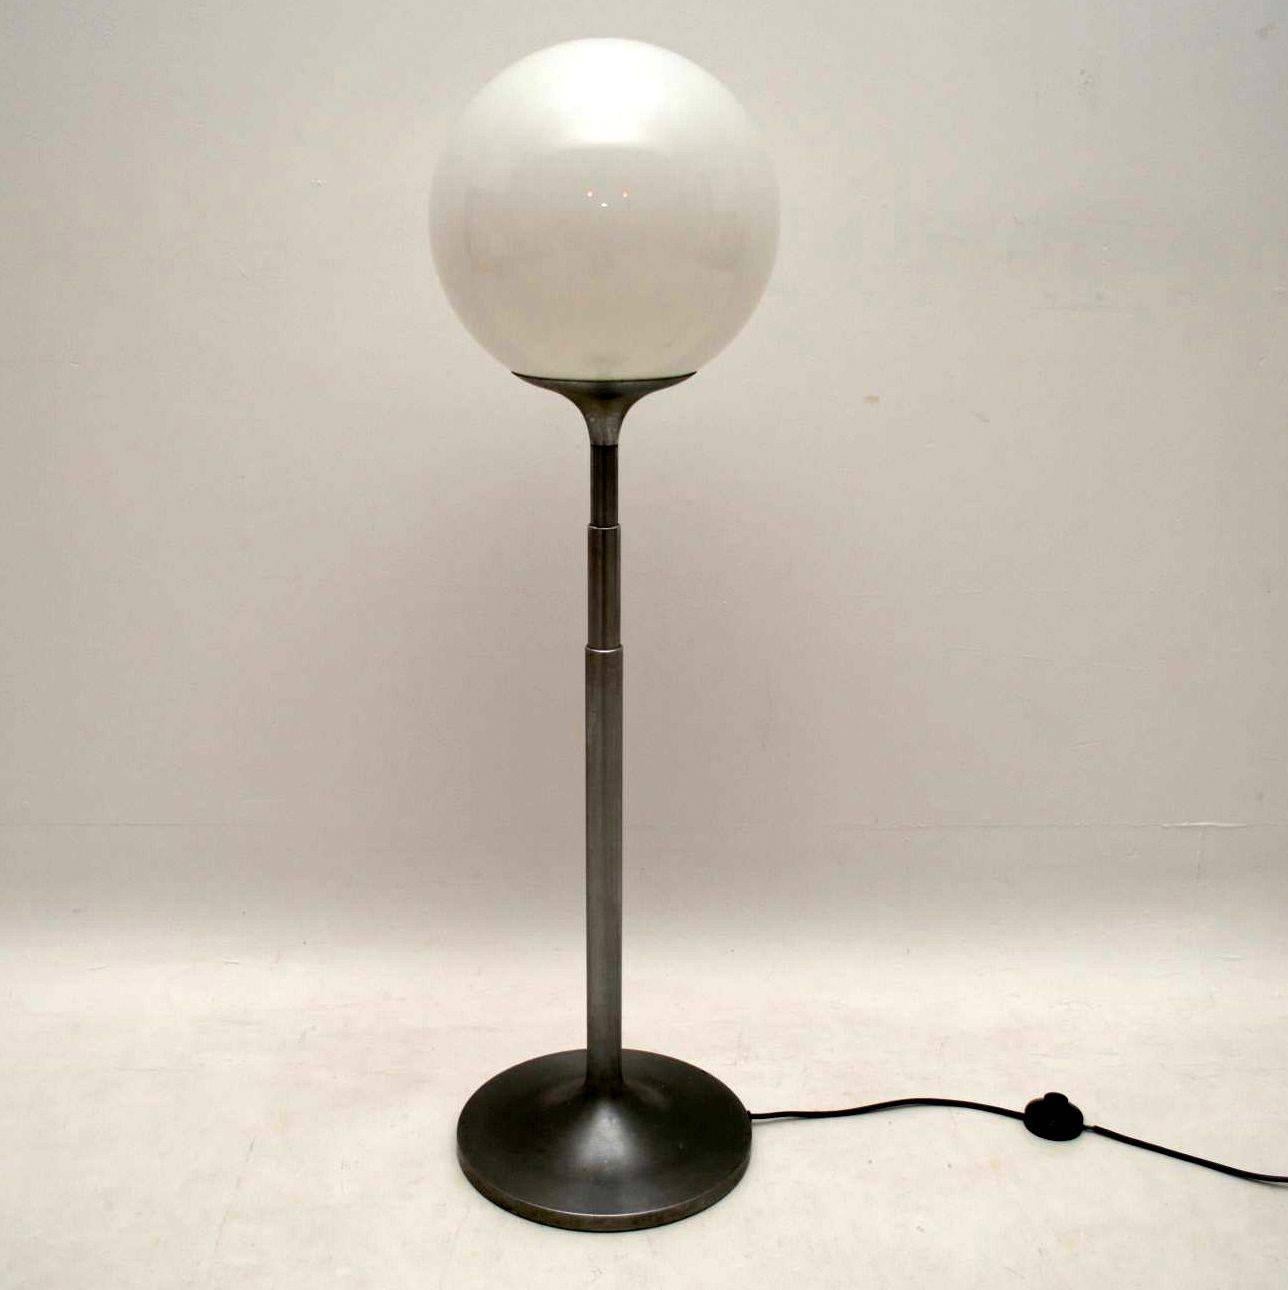 An amazing vintage lamp from the 1960s, this has a telescopic steel base and can be raised or lowered to various heights. It has a wonderful spherical glass shade, and is in excellent vintage condition. There is just some light superficial wear to